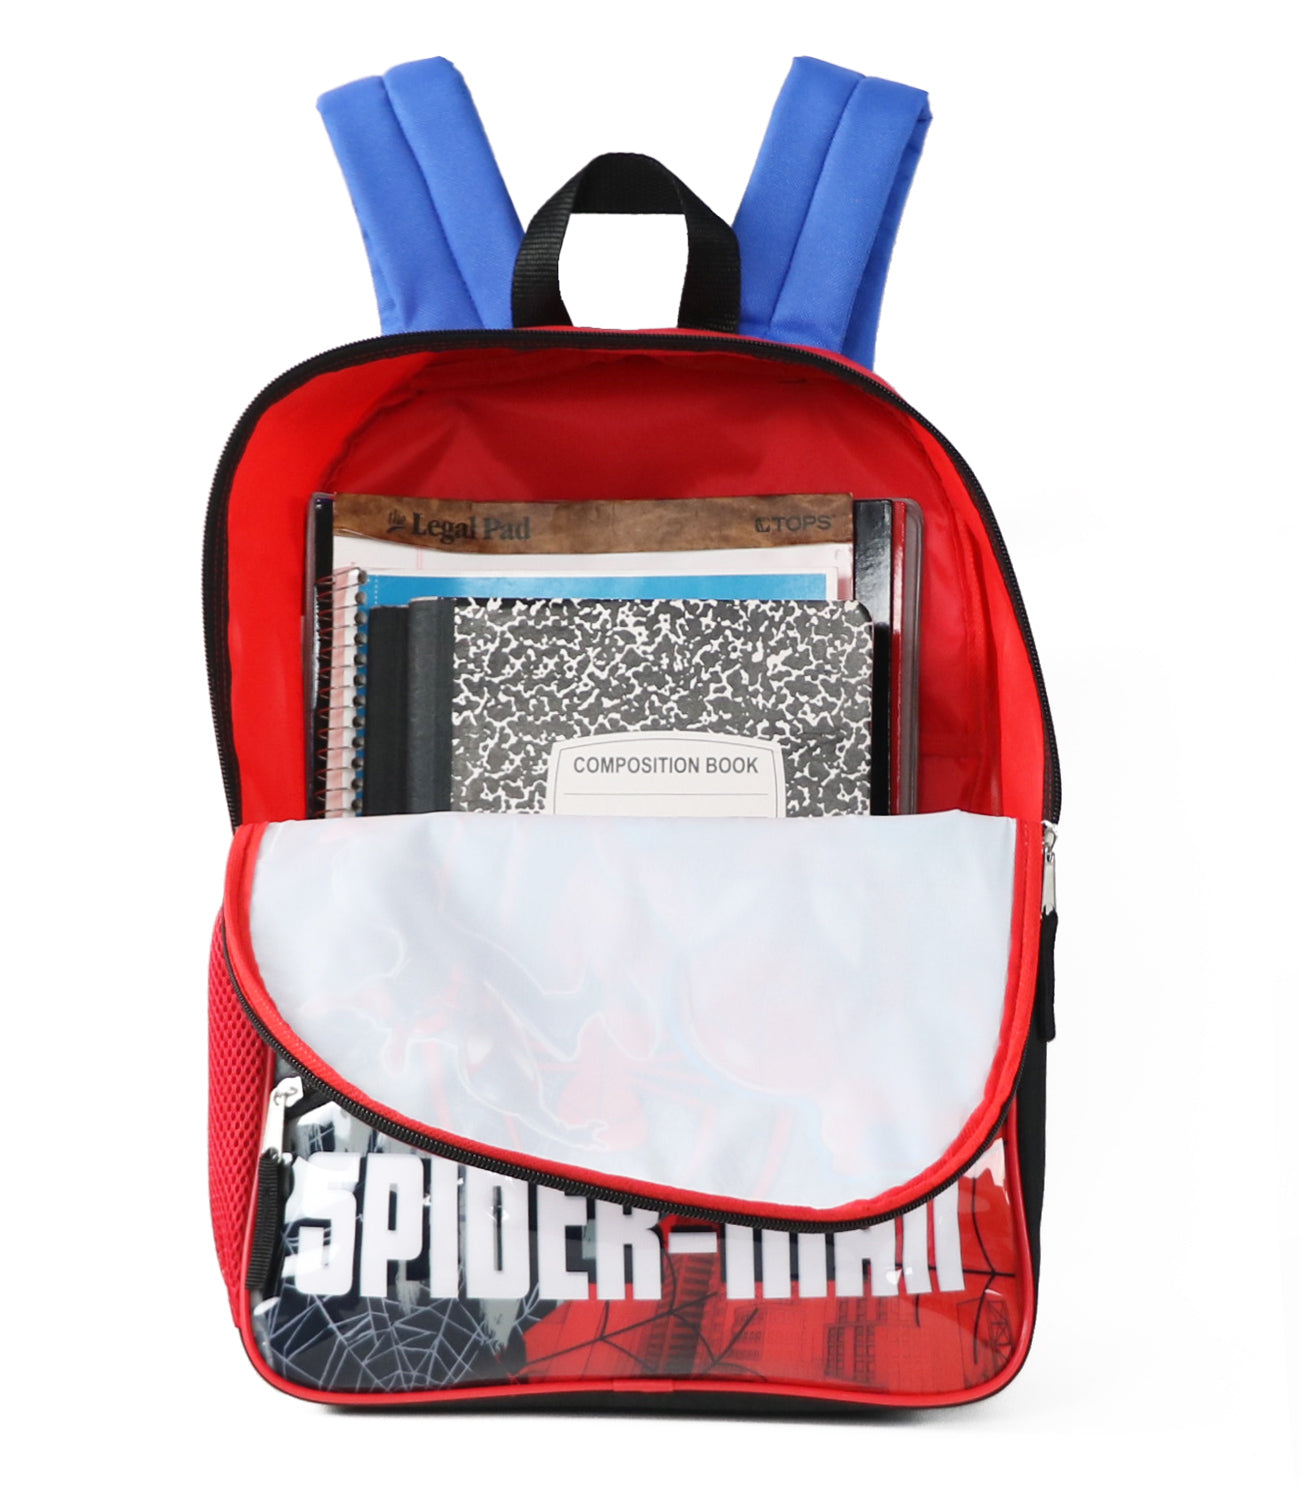 Marvel Spiderman Backpack with Lunchbox